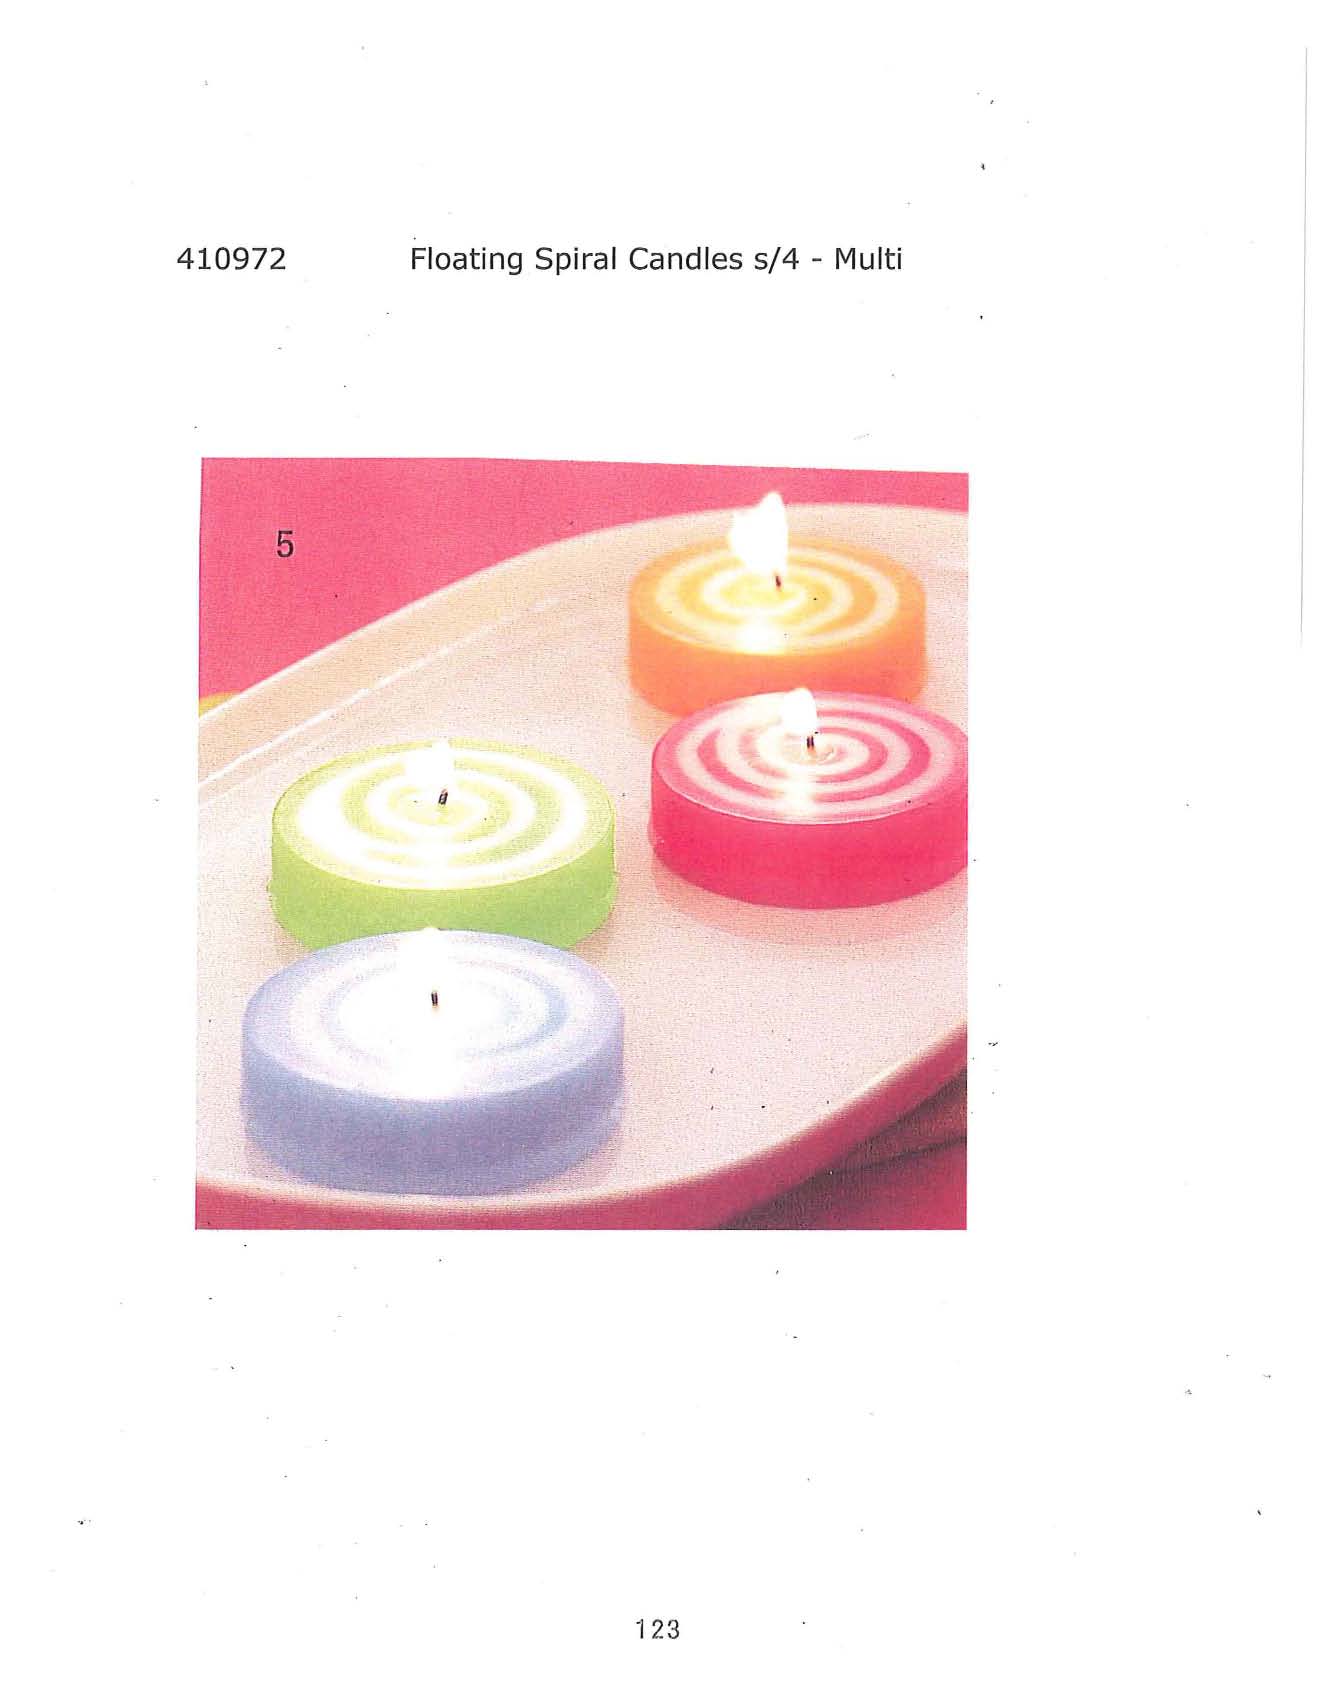 Floating Spiral Candle s/4 - Multi